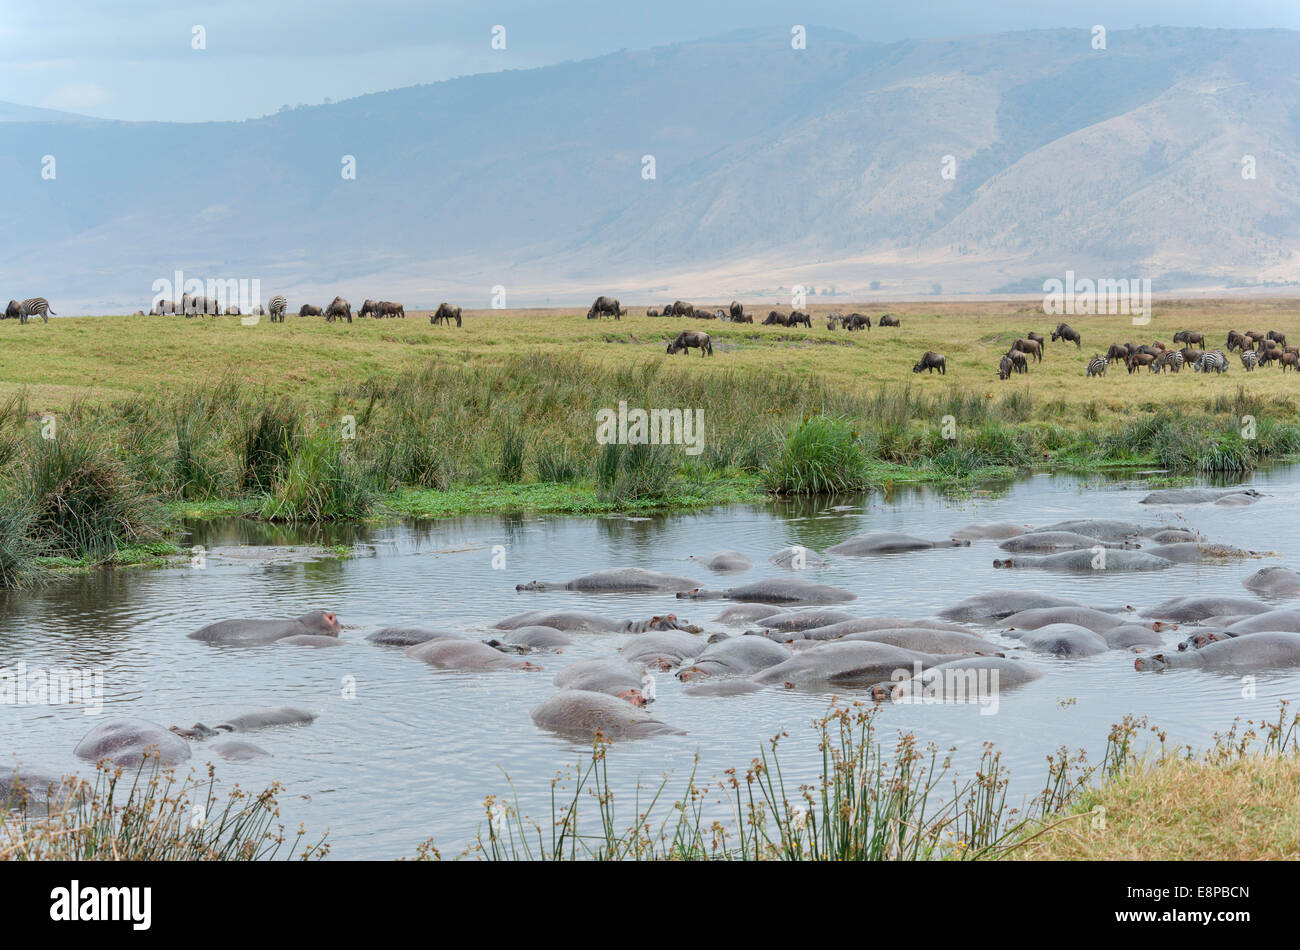 Large populated hippo pond with Wildebeests in the background Stock Photo